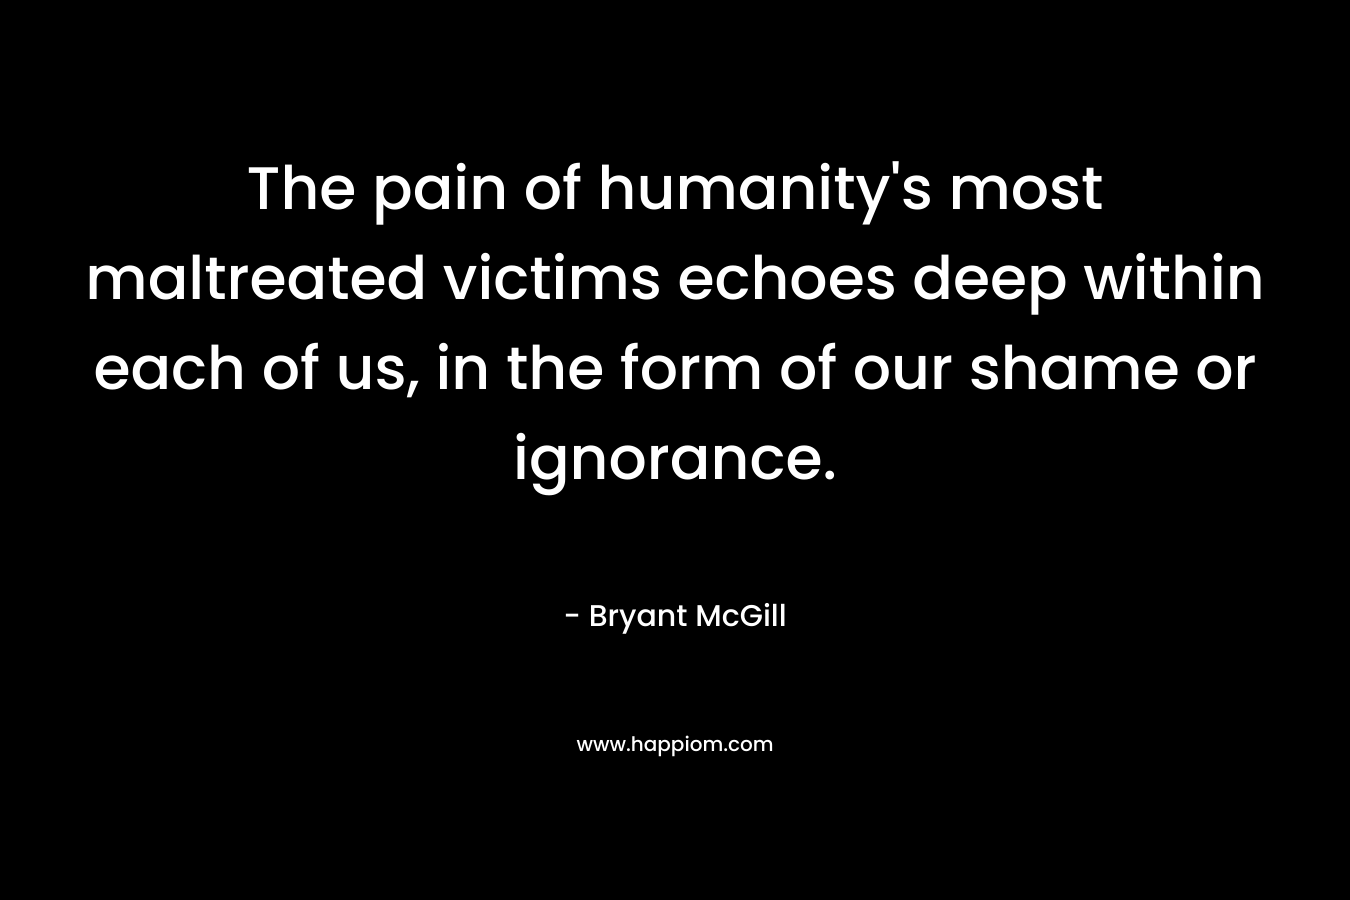 The pain of humanity’s most maltreated victims echoes deep within each of us, in the form of our shame or ignorance. – Bryant McGill